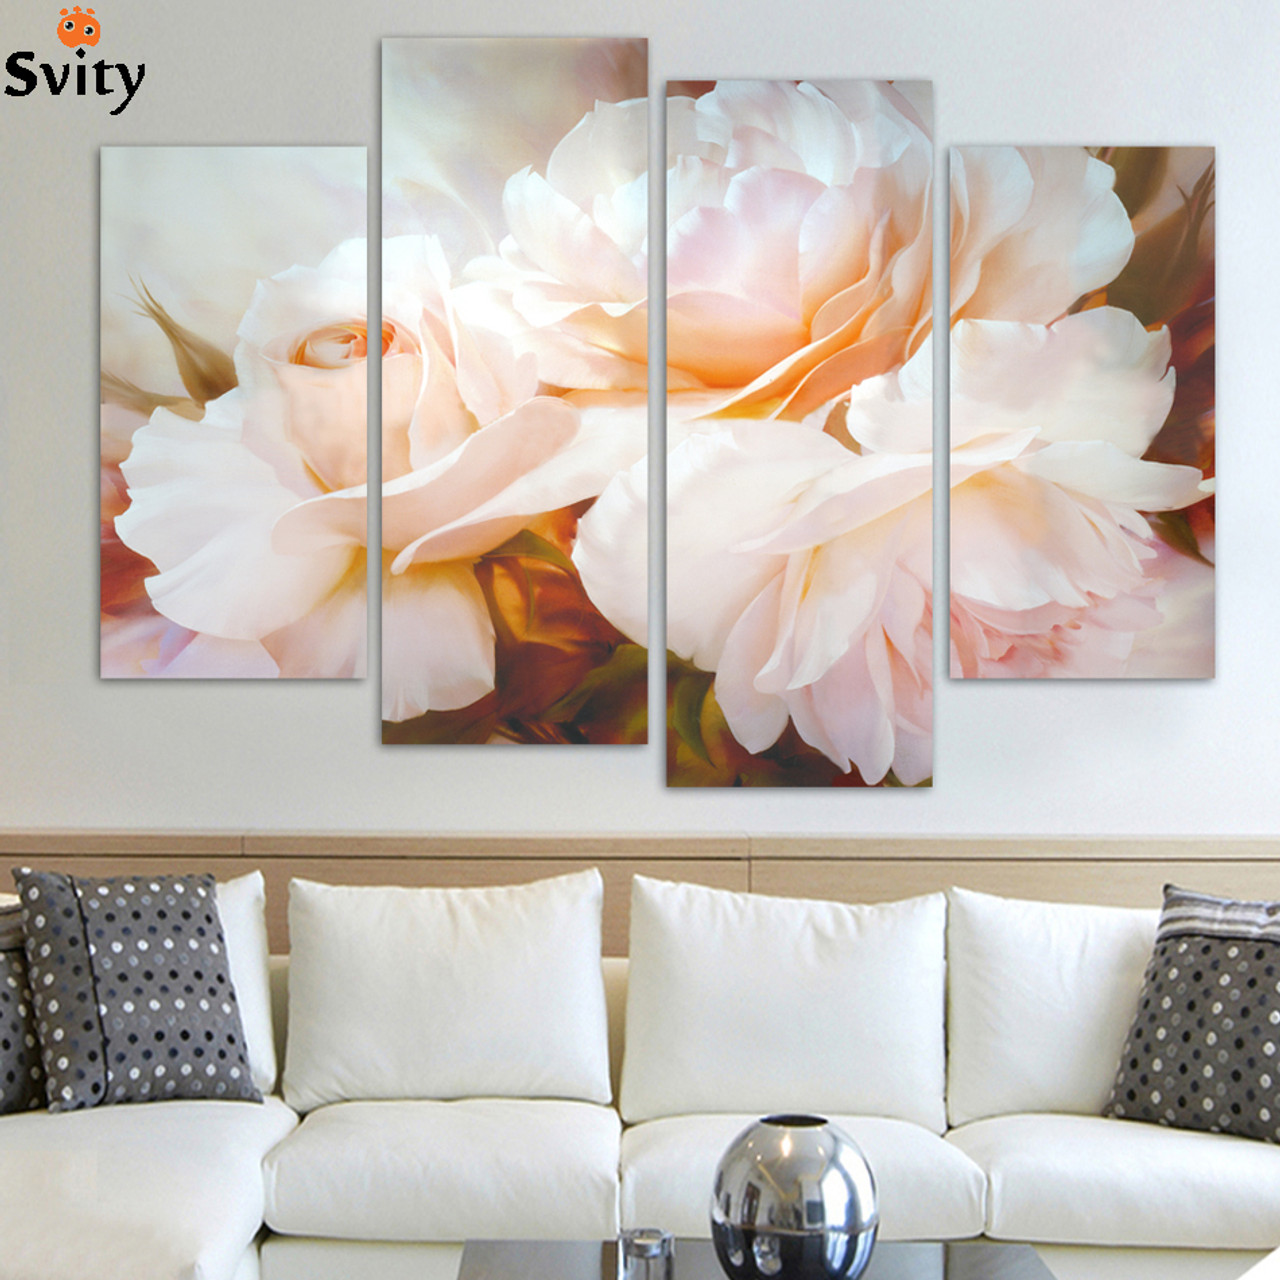 4 Pcs Set Combined Rose Flower Paintings Modern Wall Painting Canvas